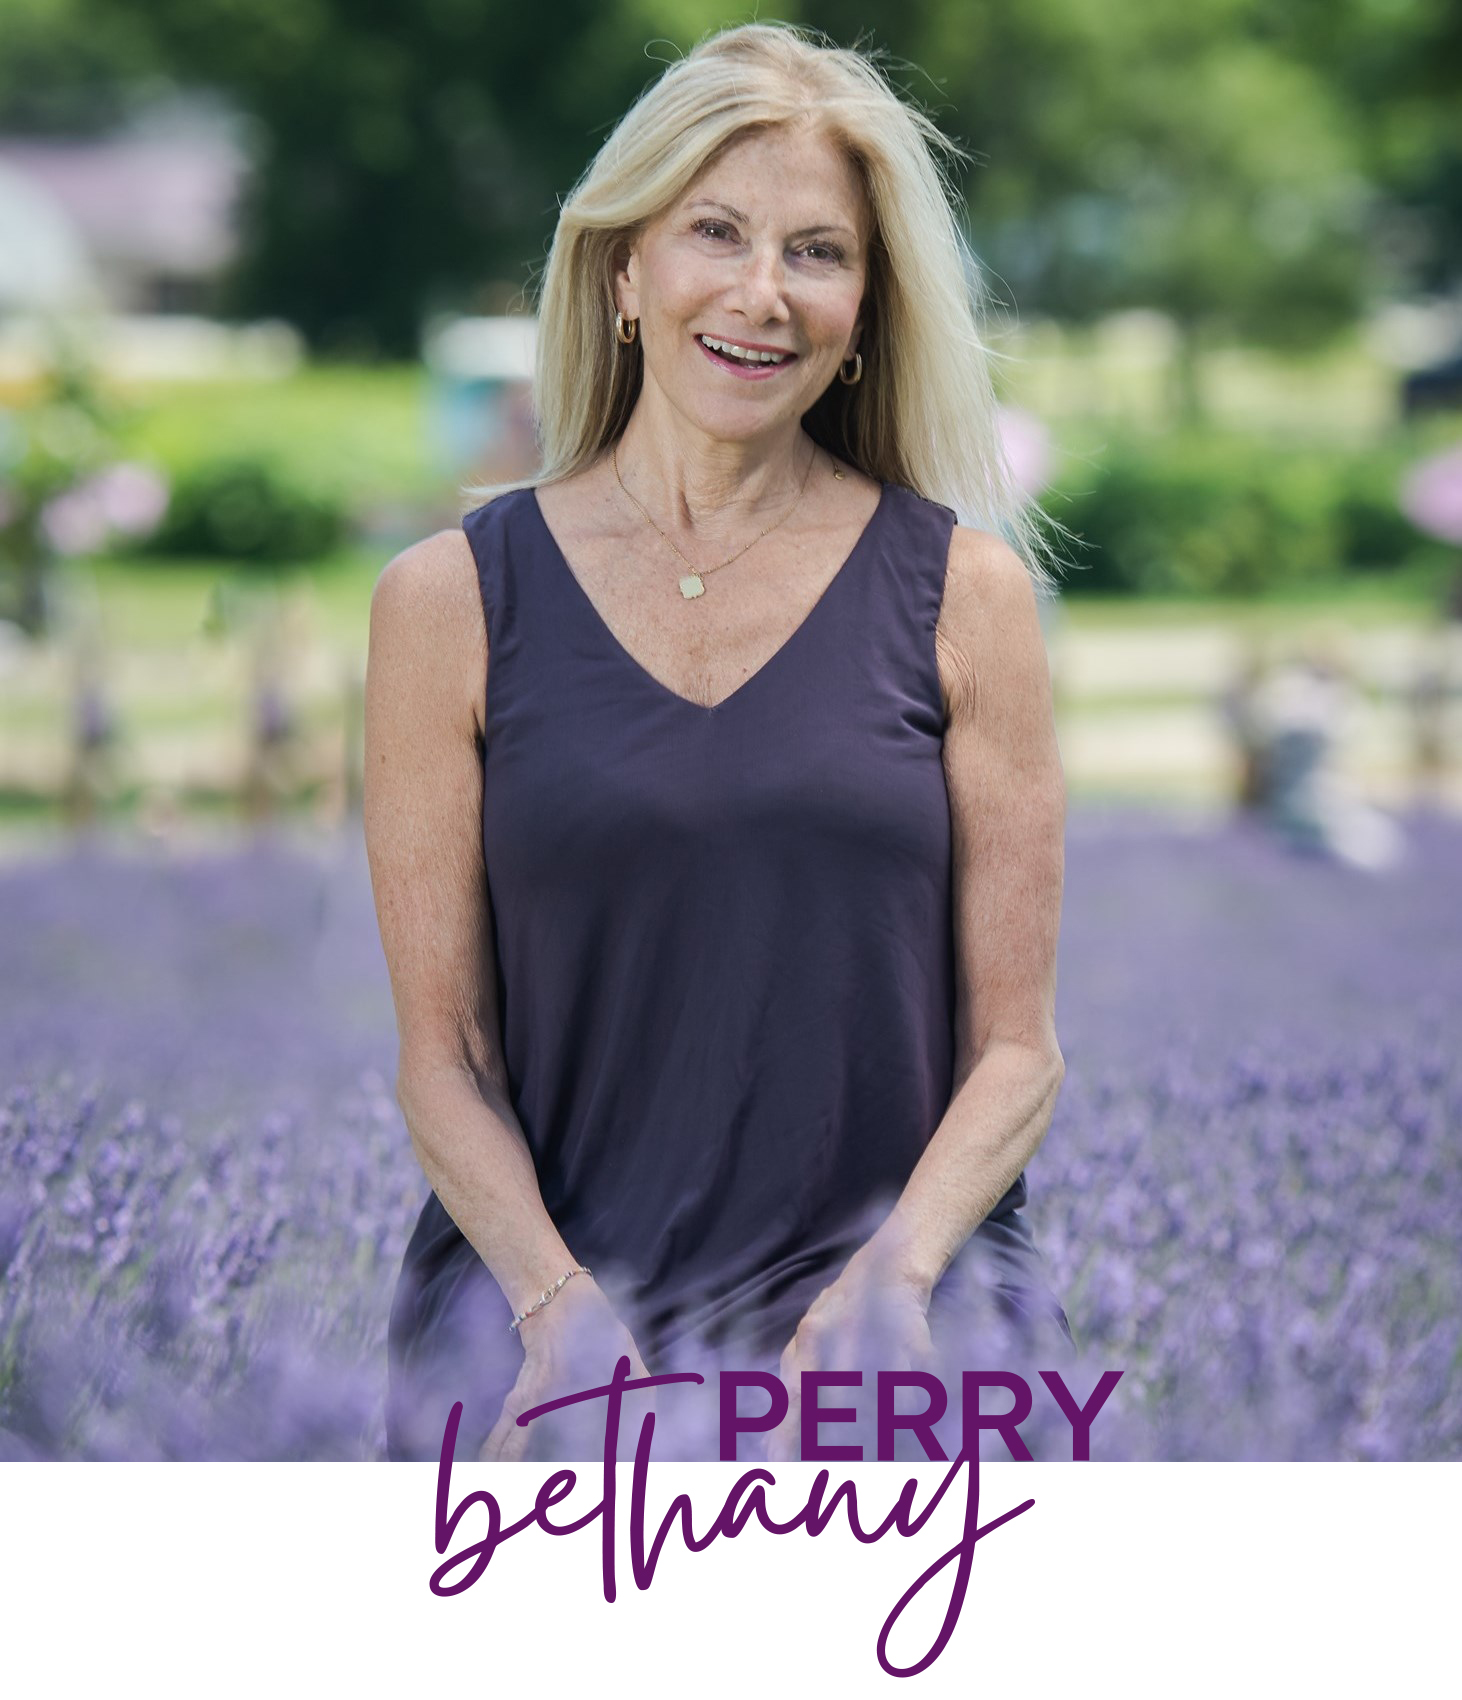 Bethany Perry image with signature